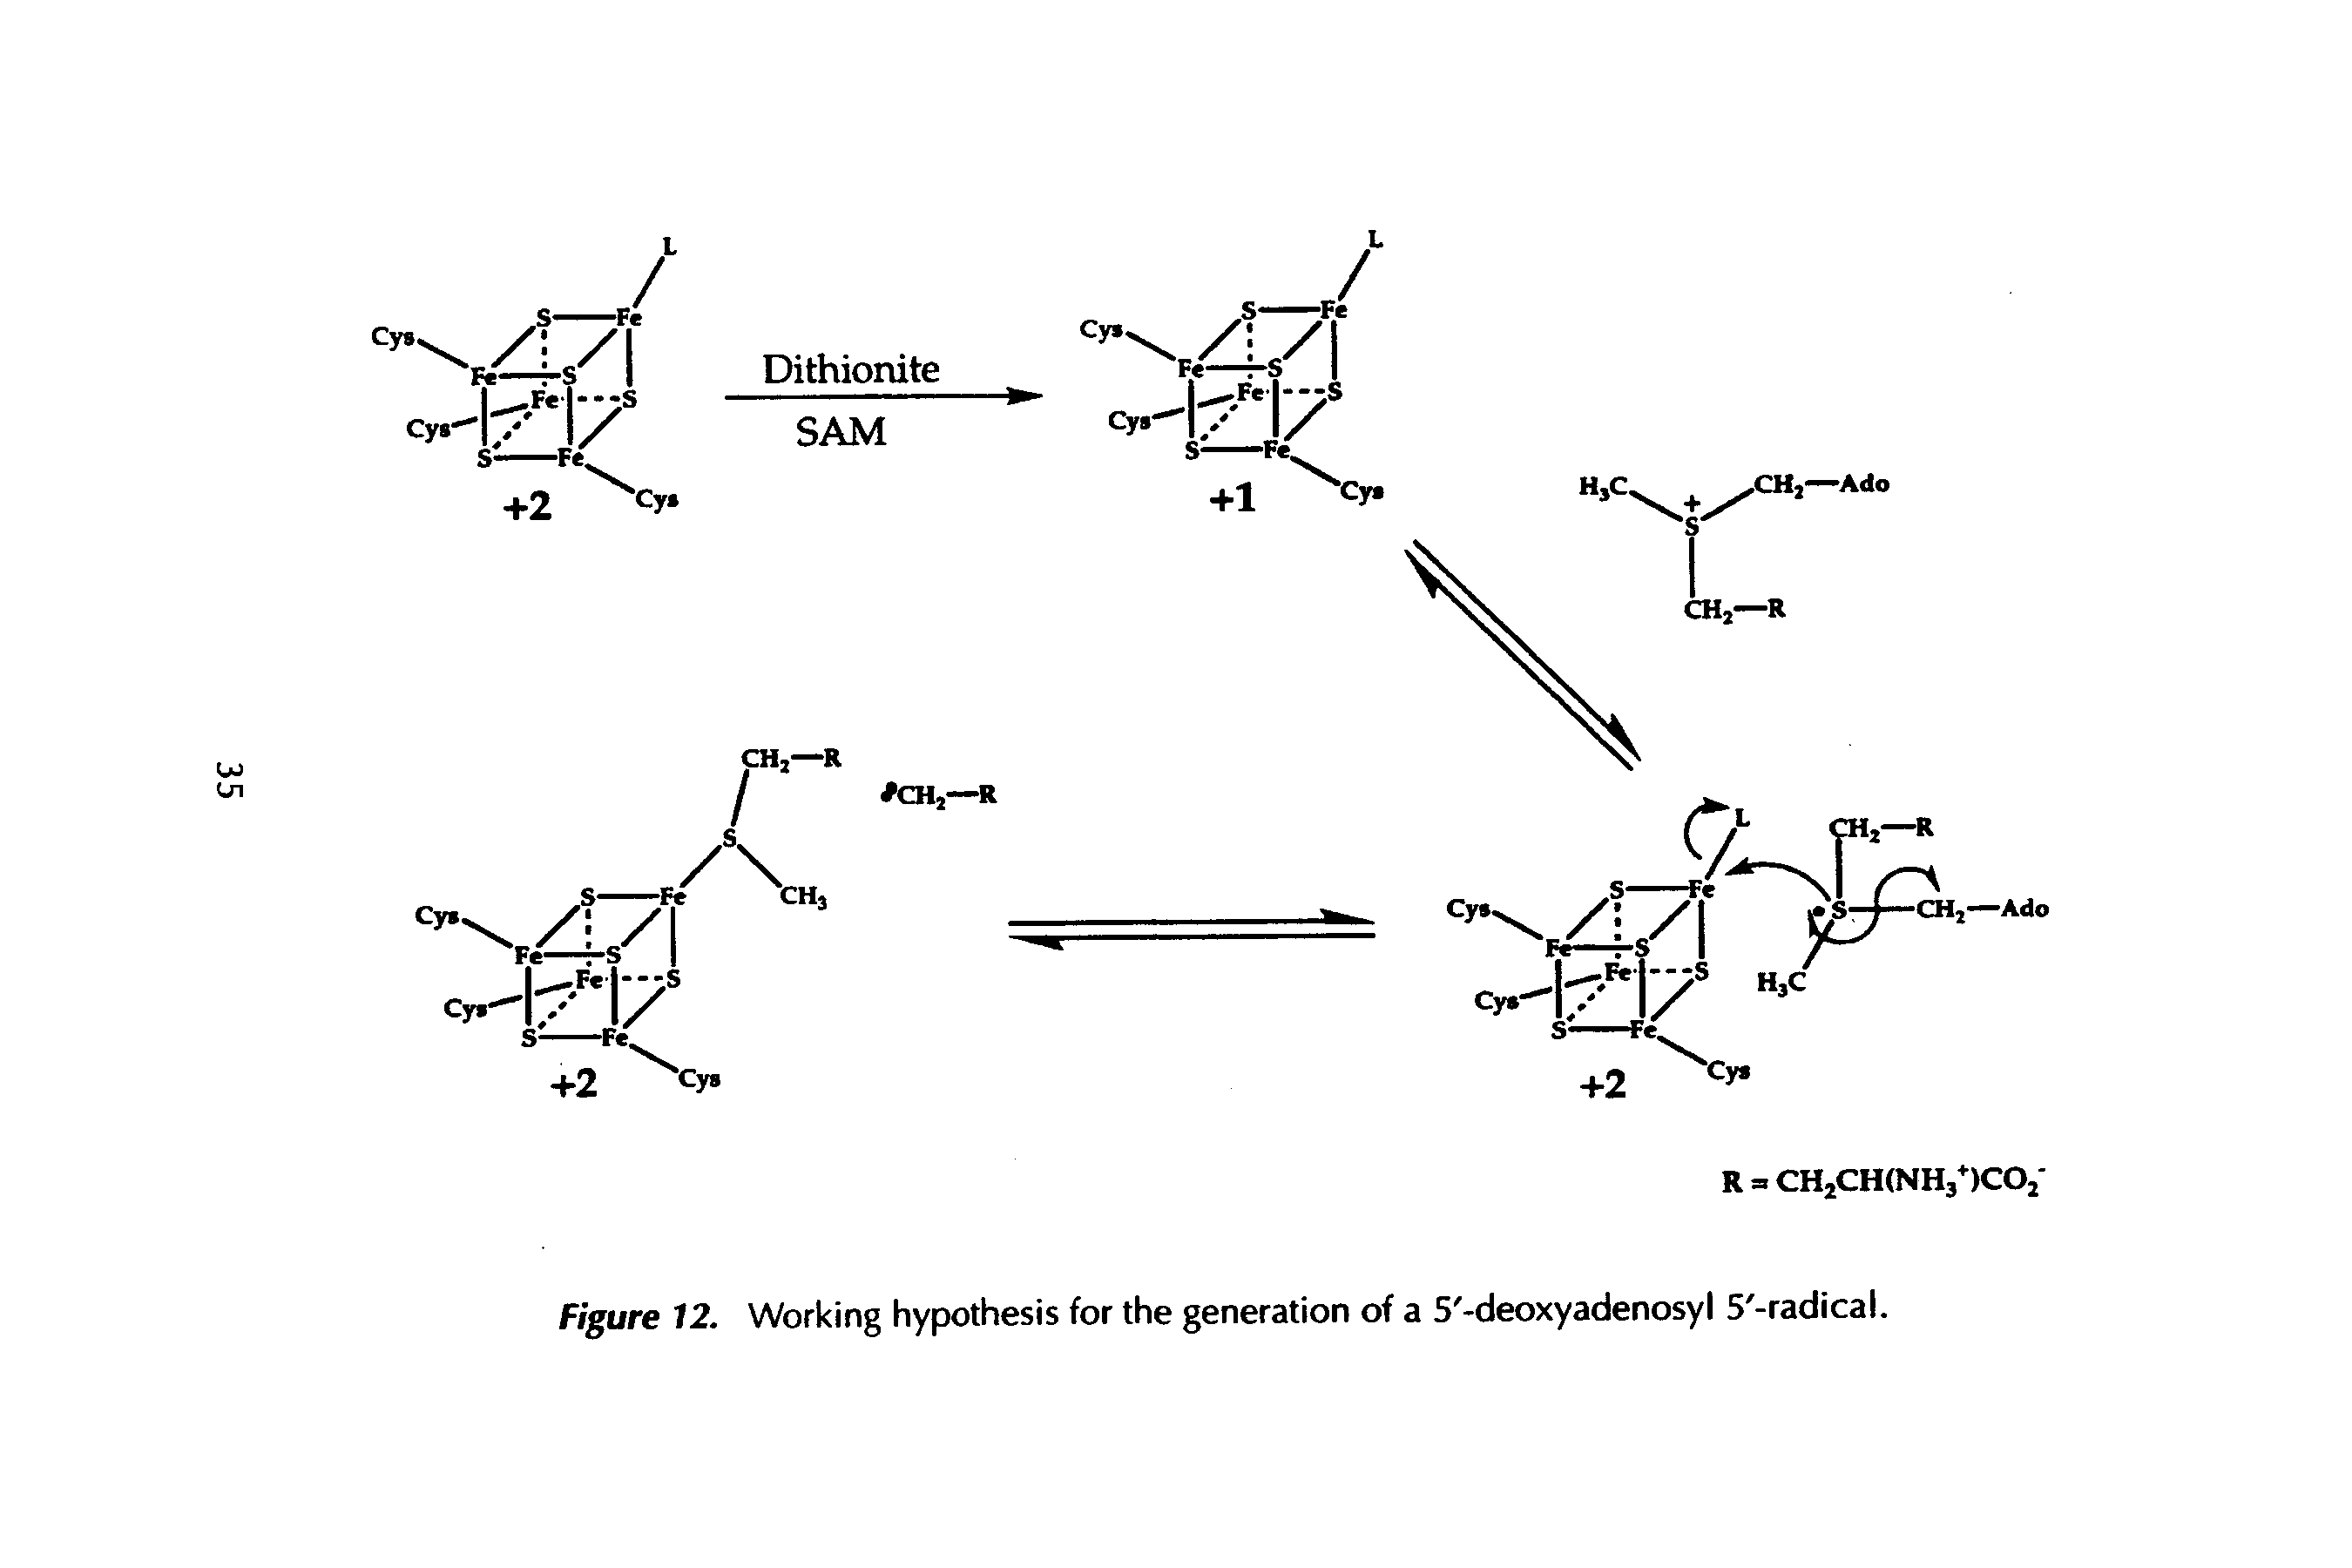 Figure 12. Working hypothesis for the generation of a 5 -deoxyadenosyl 5 -radical.